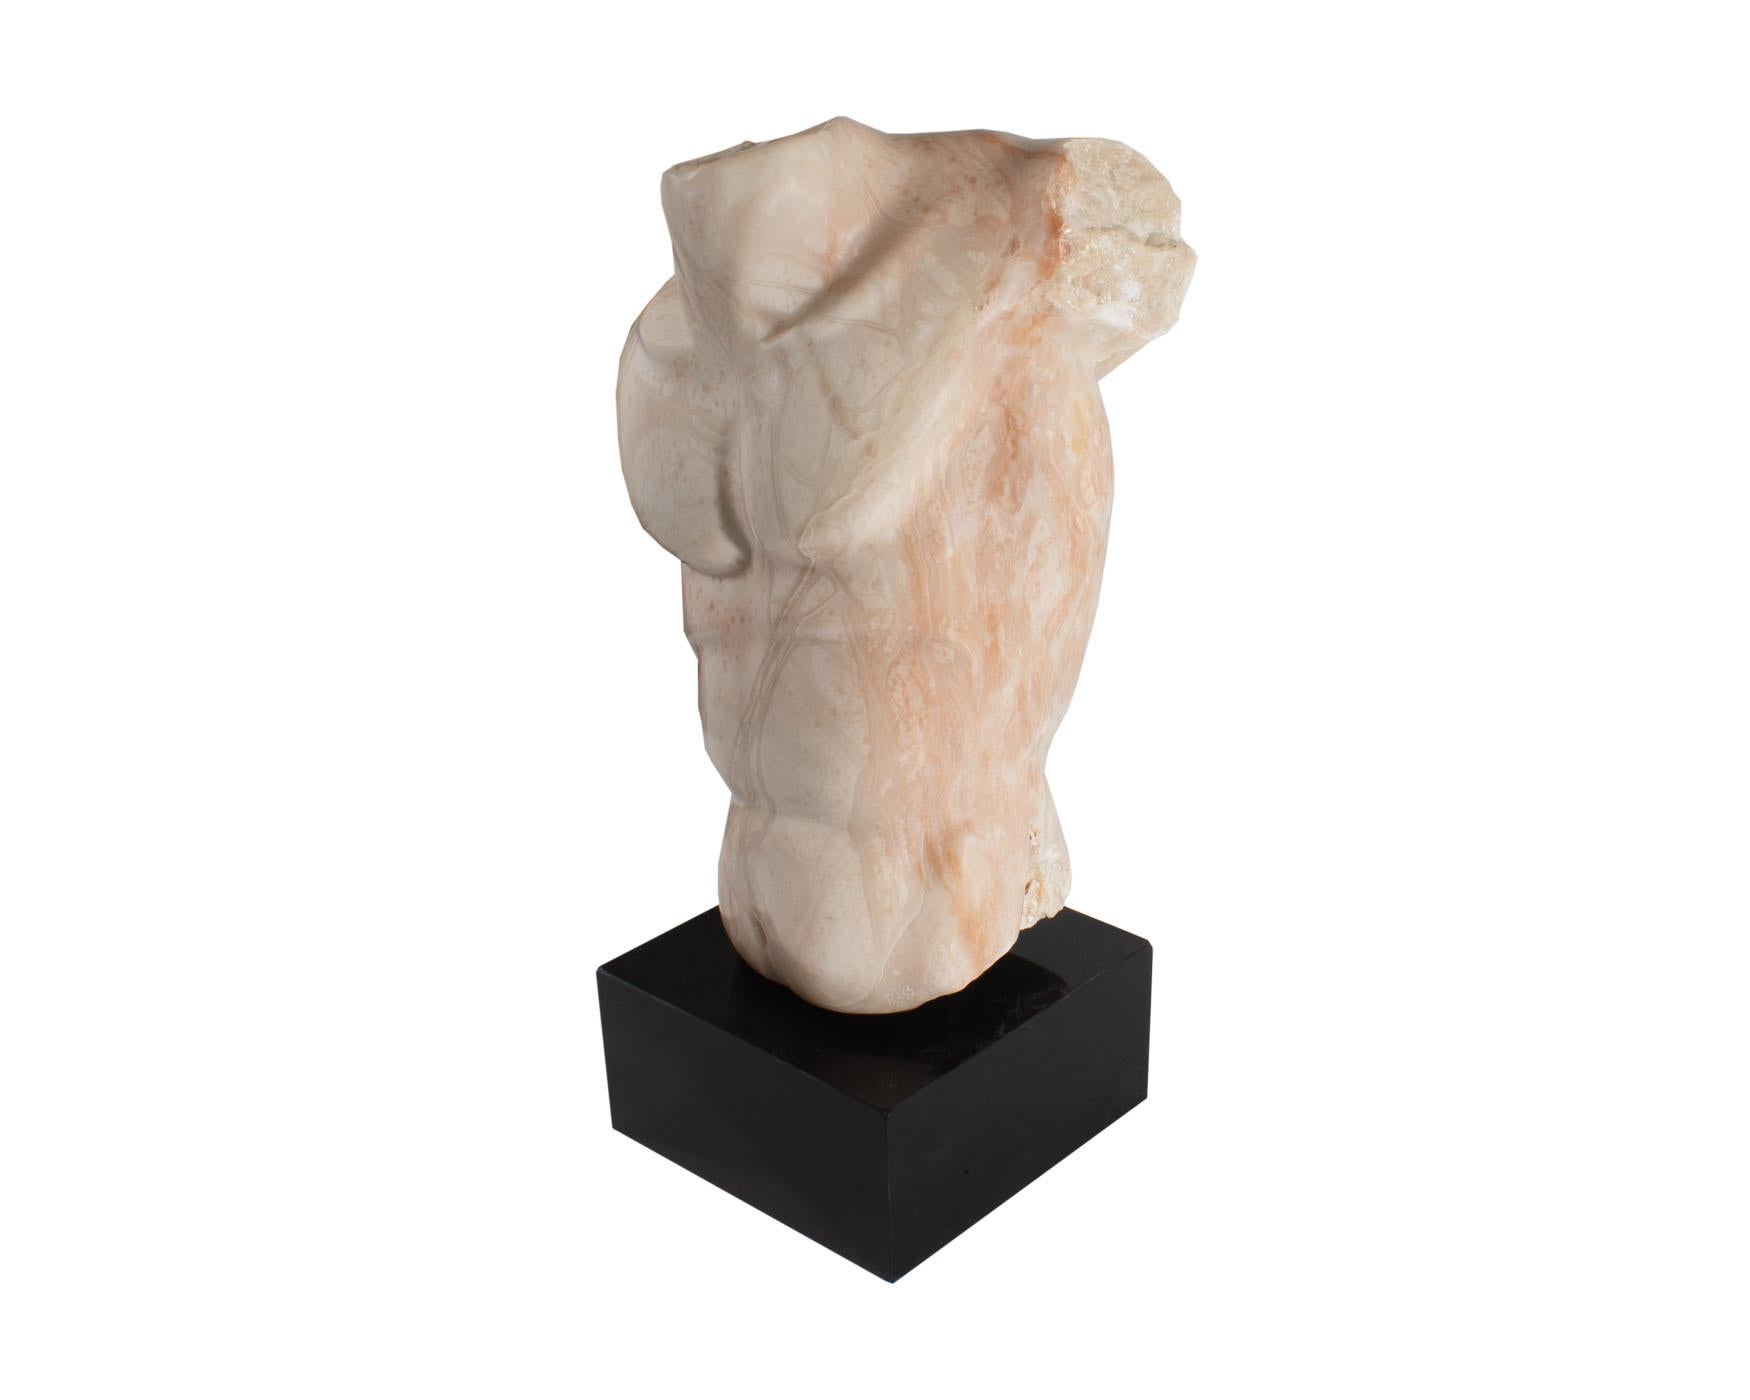 A stone sculpture of a torso by American artist Bryan Ross. The piece is constructed from pink alabaster stone and rests on a black base. The idealized male torso naturally showcases the alabaster's marbling which mimics veins and tendons. The